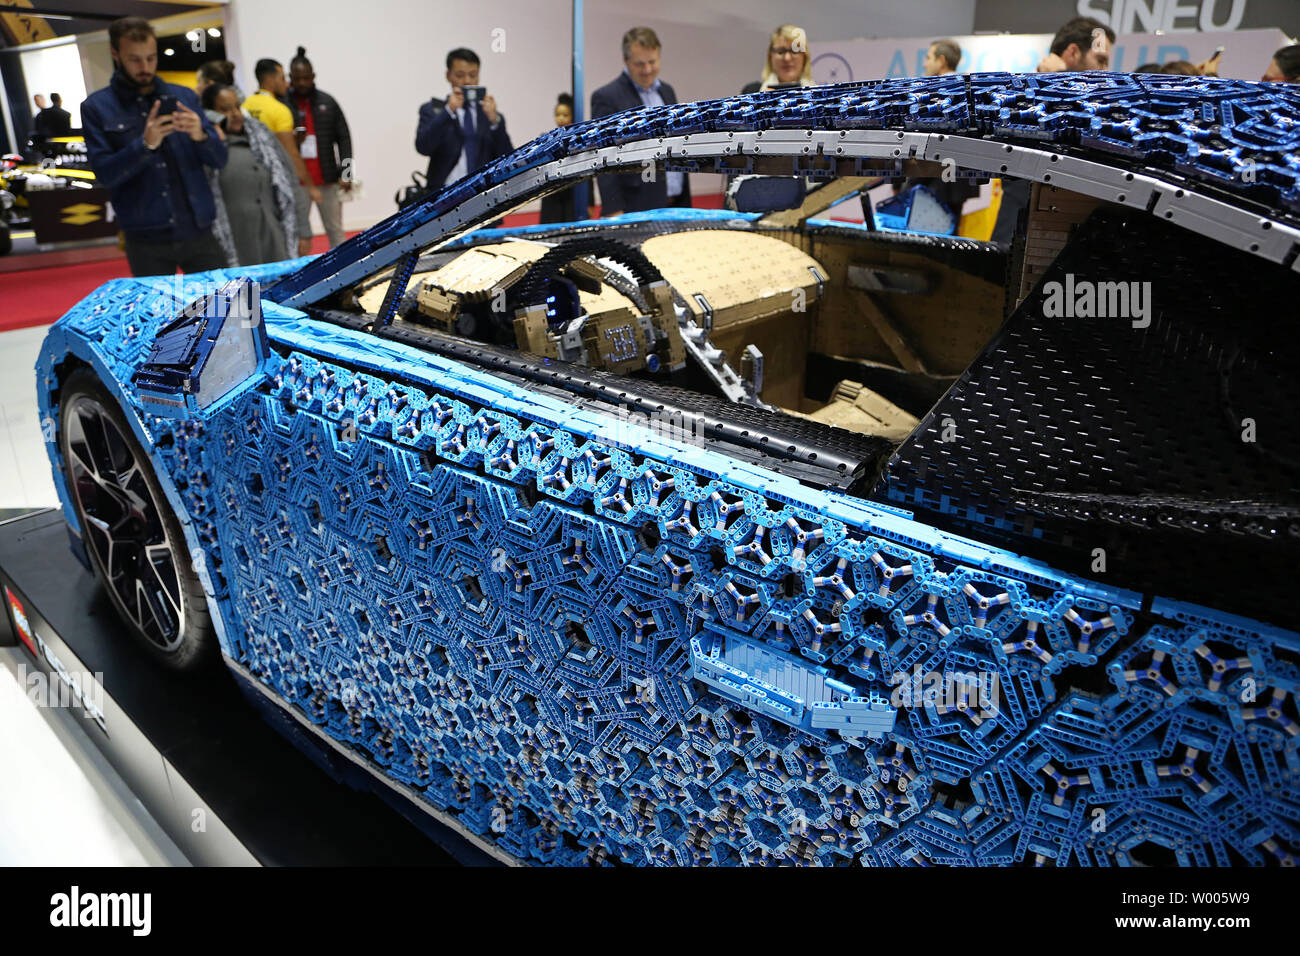 A life-size Bugatti Chiron made from Lego is seen on display during press  day at the biennial Paris Motor Show in Paris on October 2, 2018. The show,  the first motor show